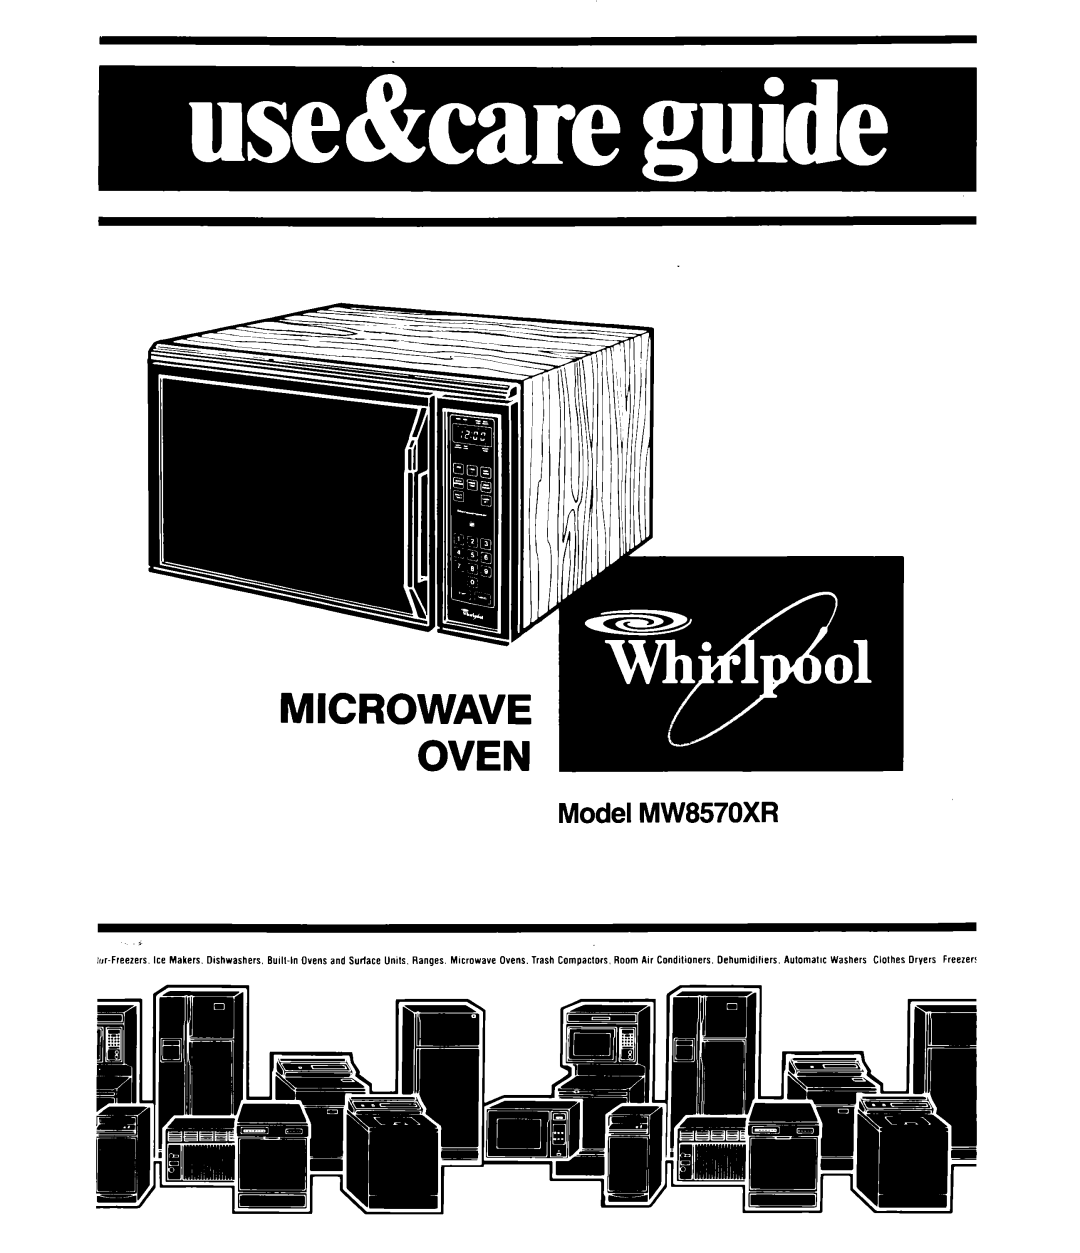 Whirlpool manual Model MW8570XR, Microwave Oven 